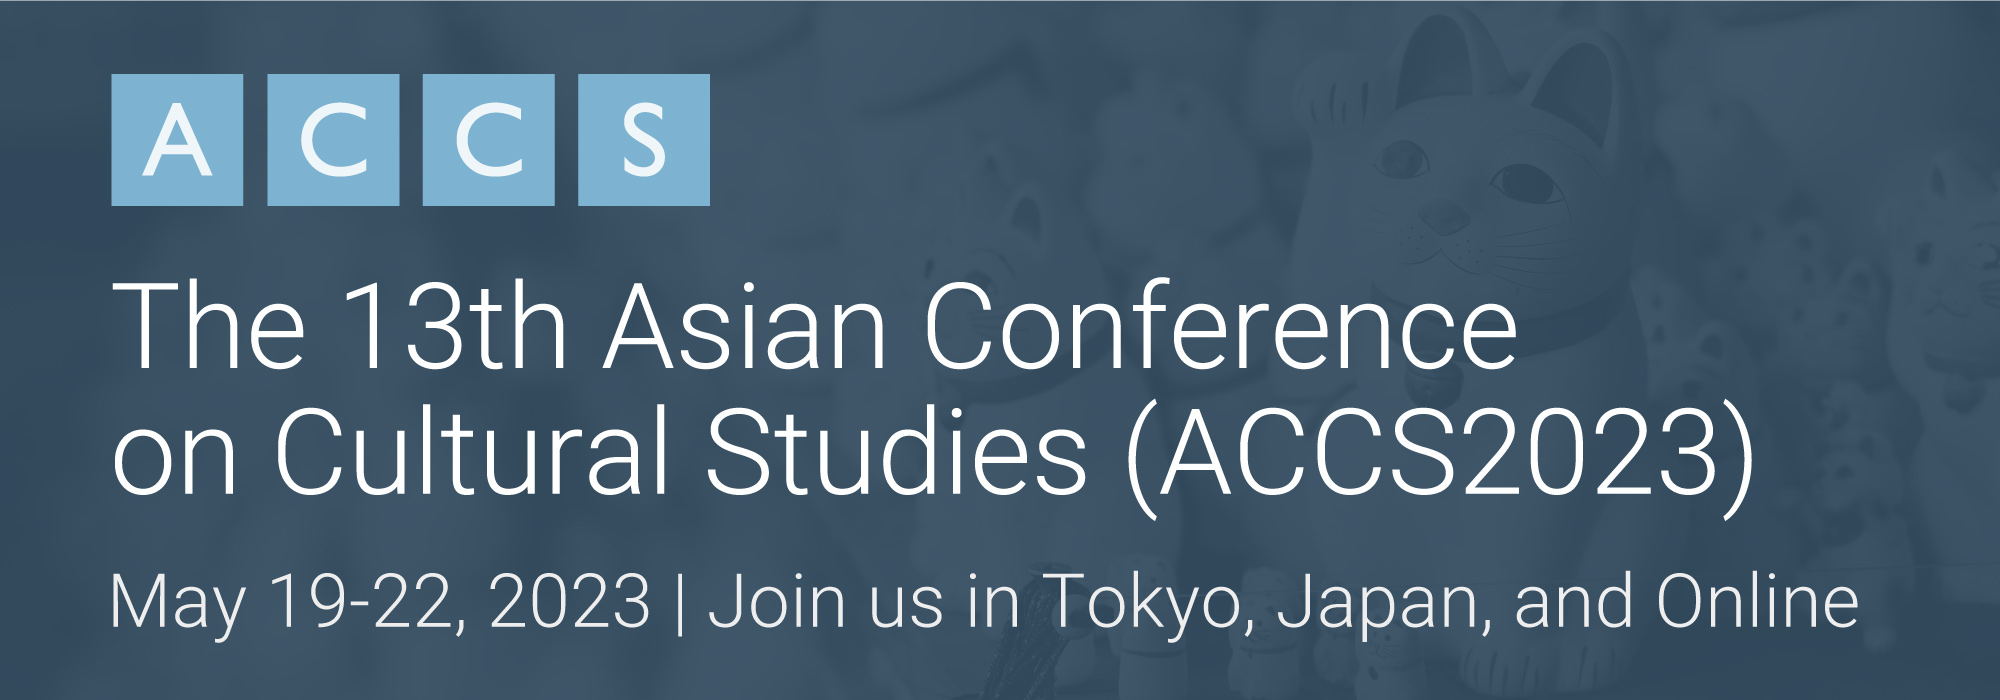 The 13th Asian Conference on Cultural Studies (ACCS2023) Logo